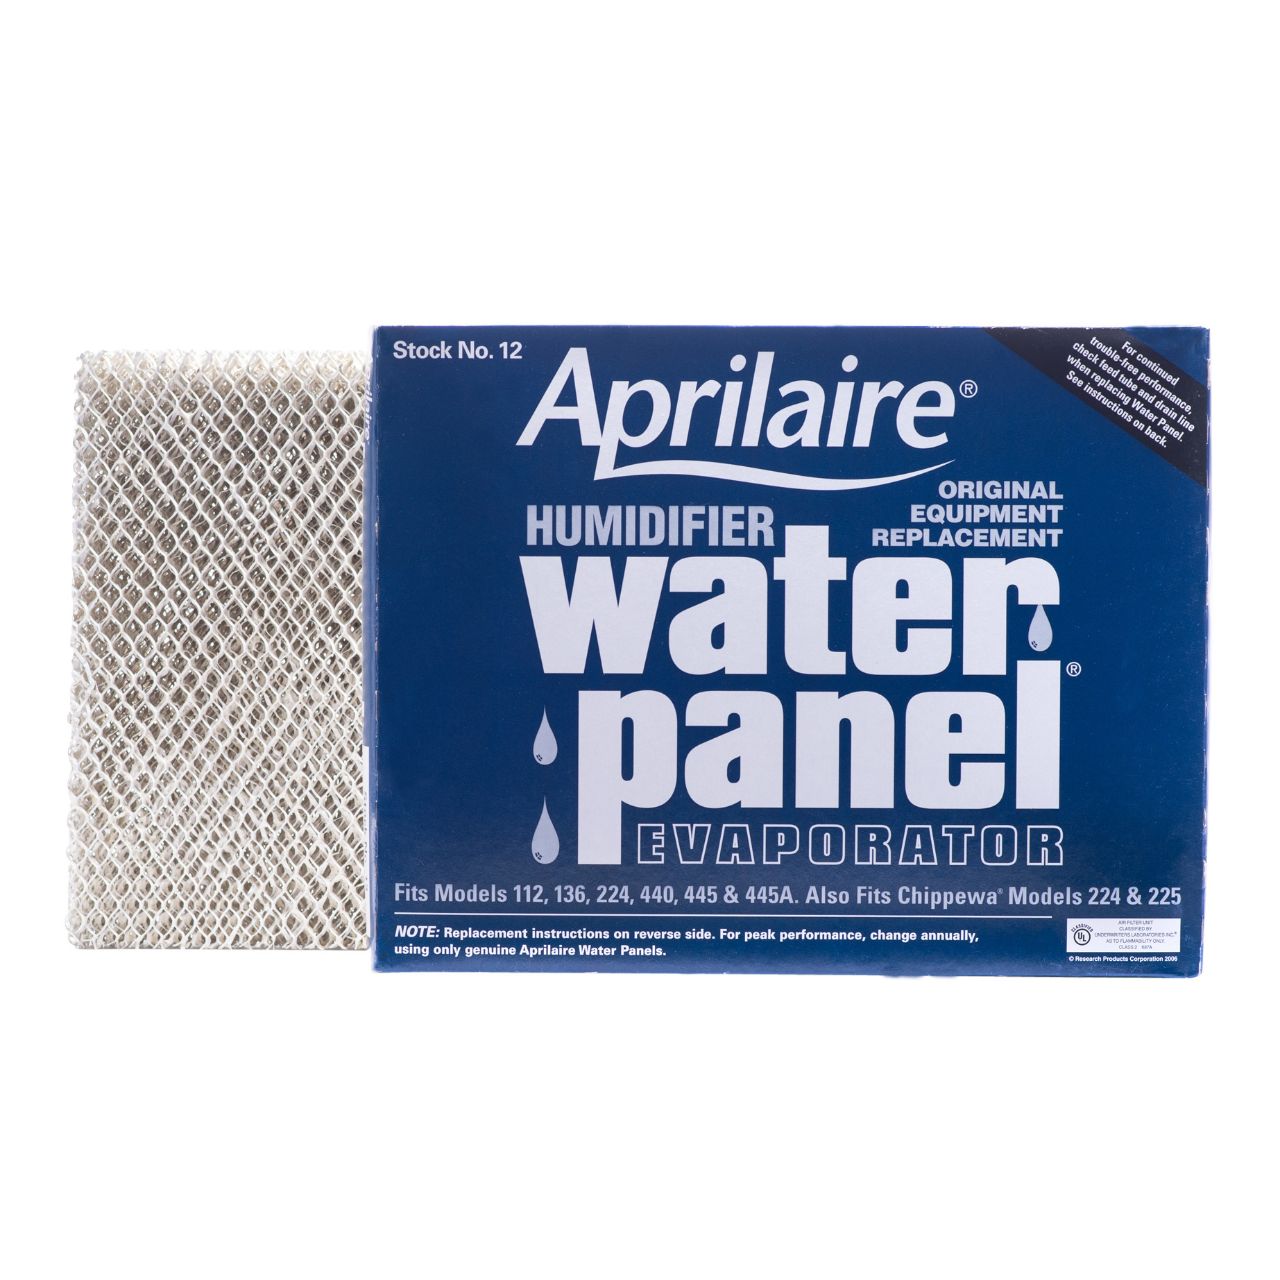 Aprilaire Water Panel Evaporator for Aprilaire Humidifiers 440, 445, 445A, 112 and 224. 2172107